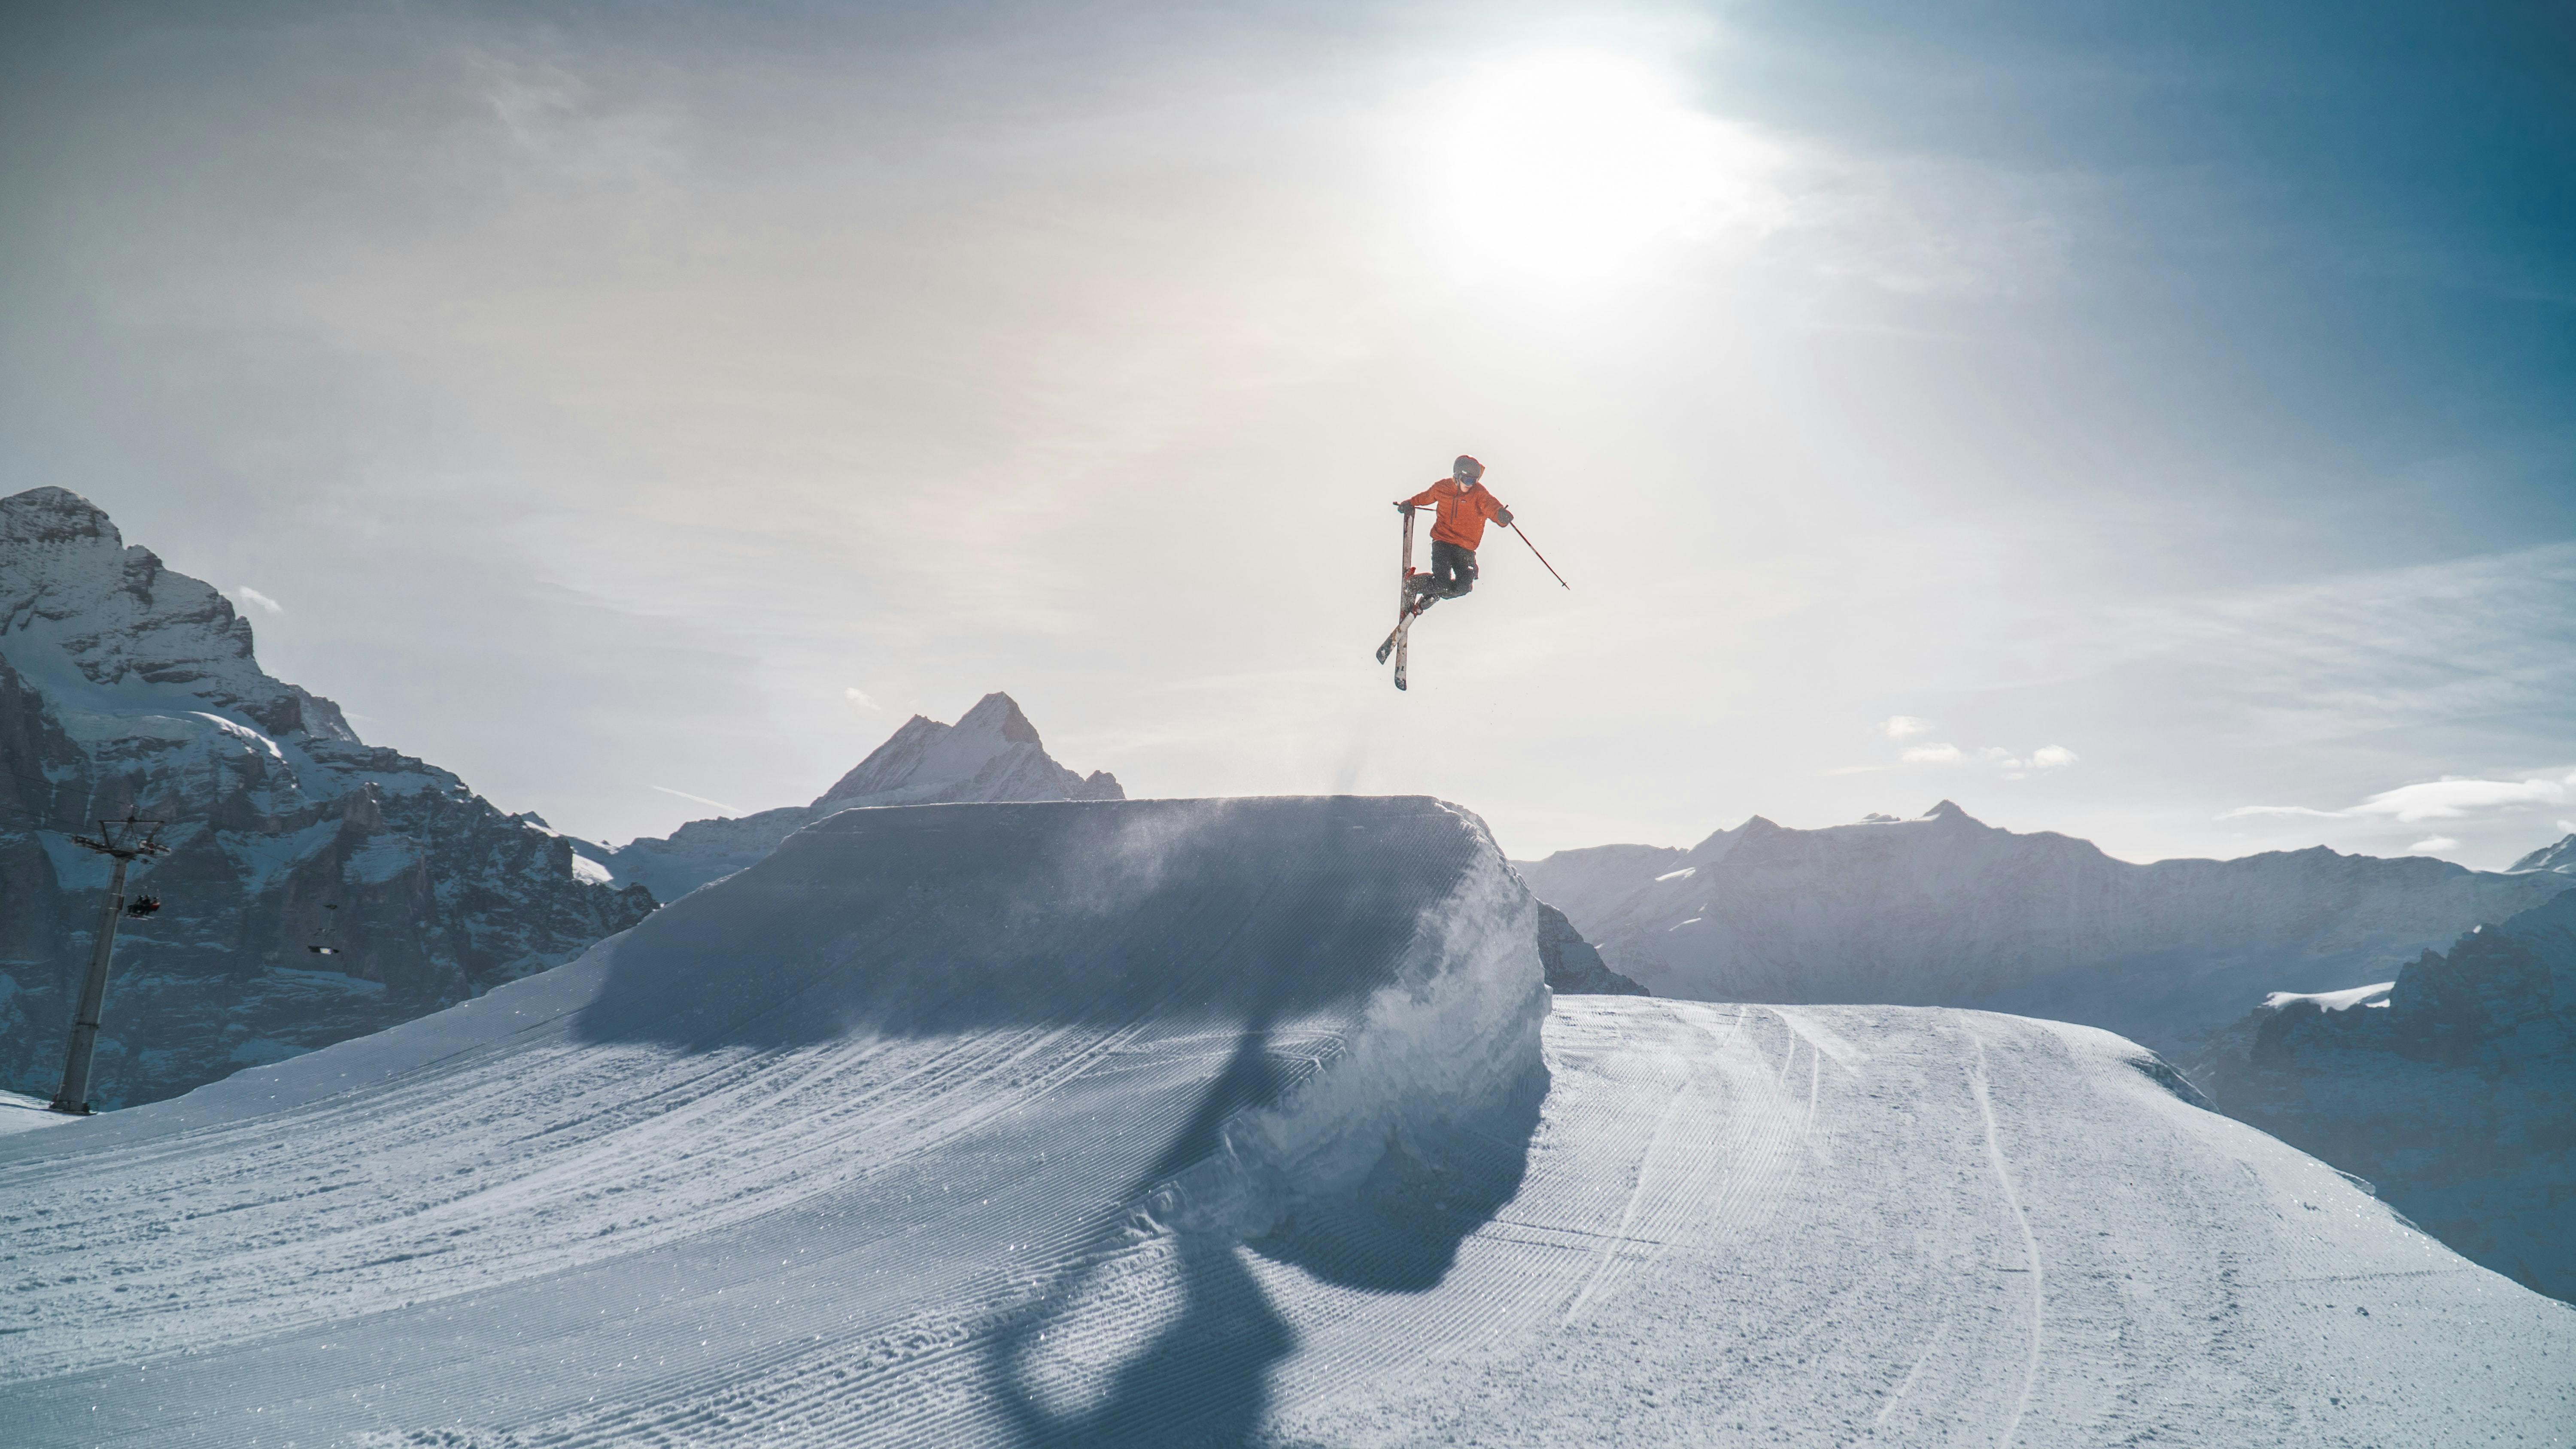 Someone jumps off a ramp with their skis crossing in the air. The skier is small against a vast landscape. 